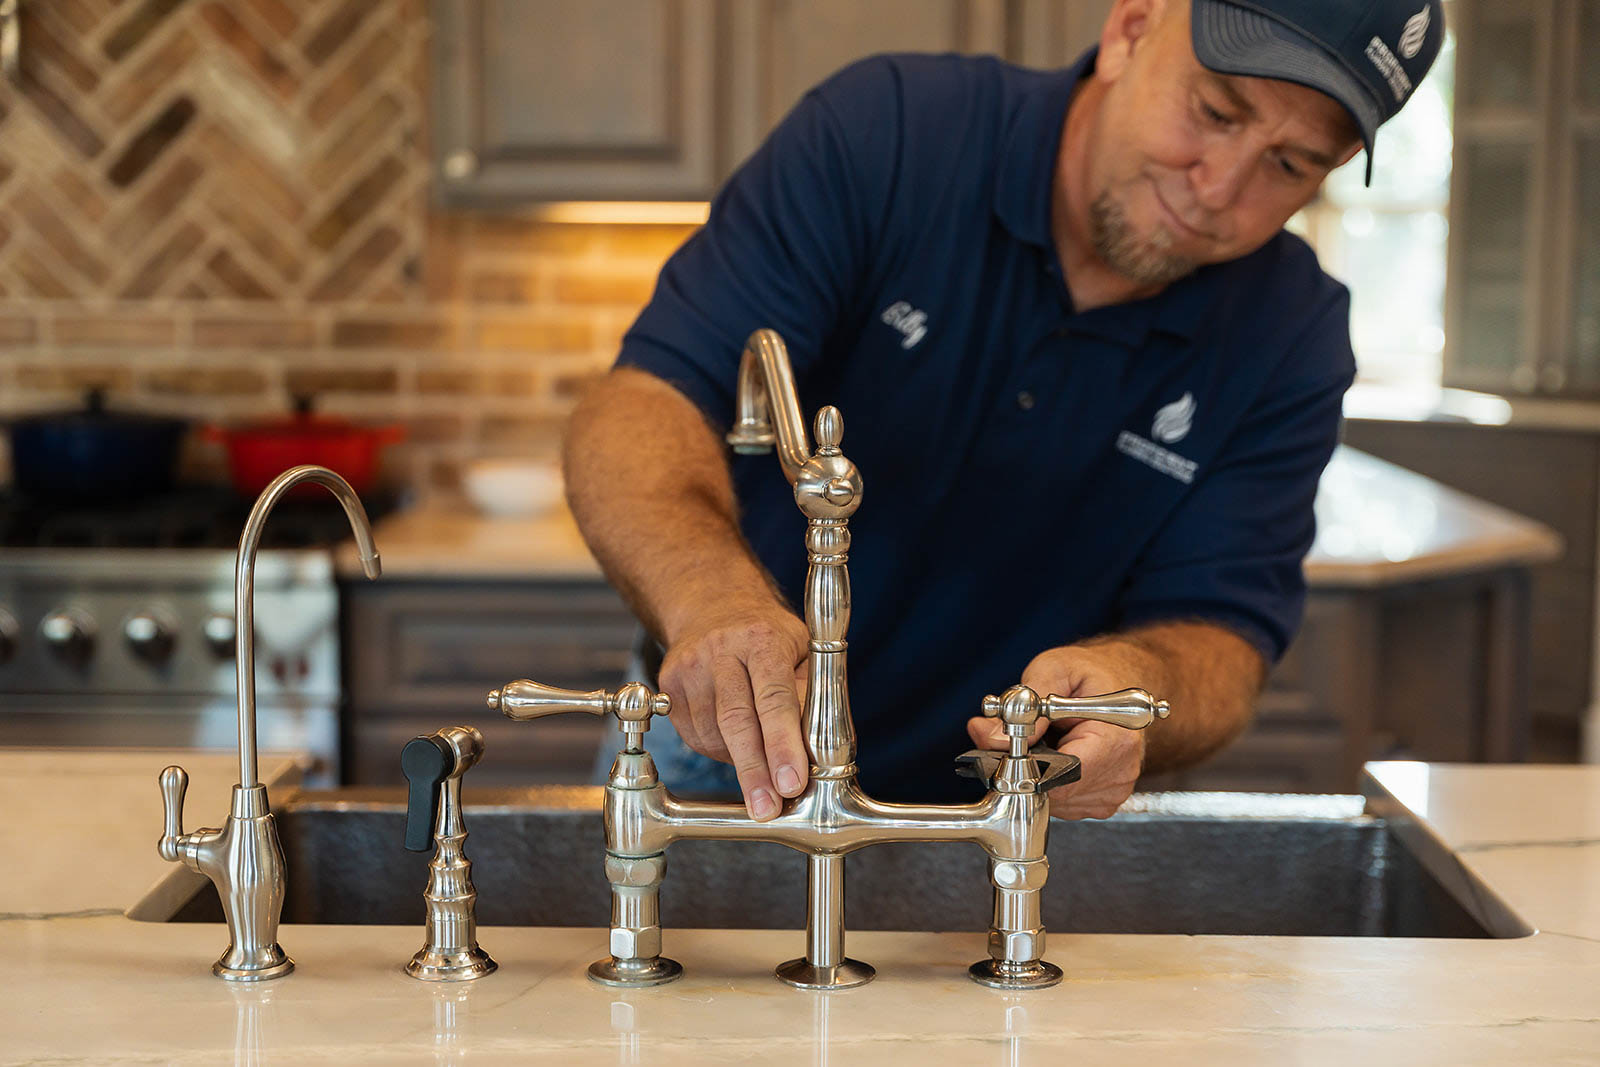 Comparing plumbing services in Dripping Springs - Finding the best plumber